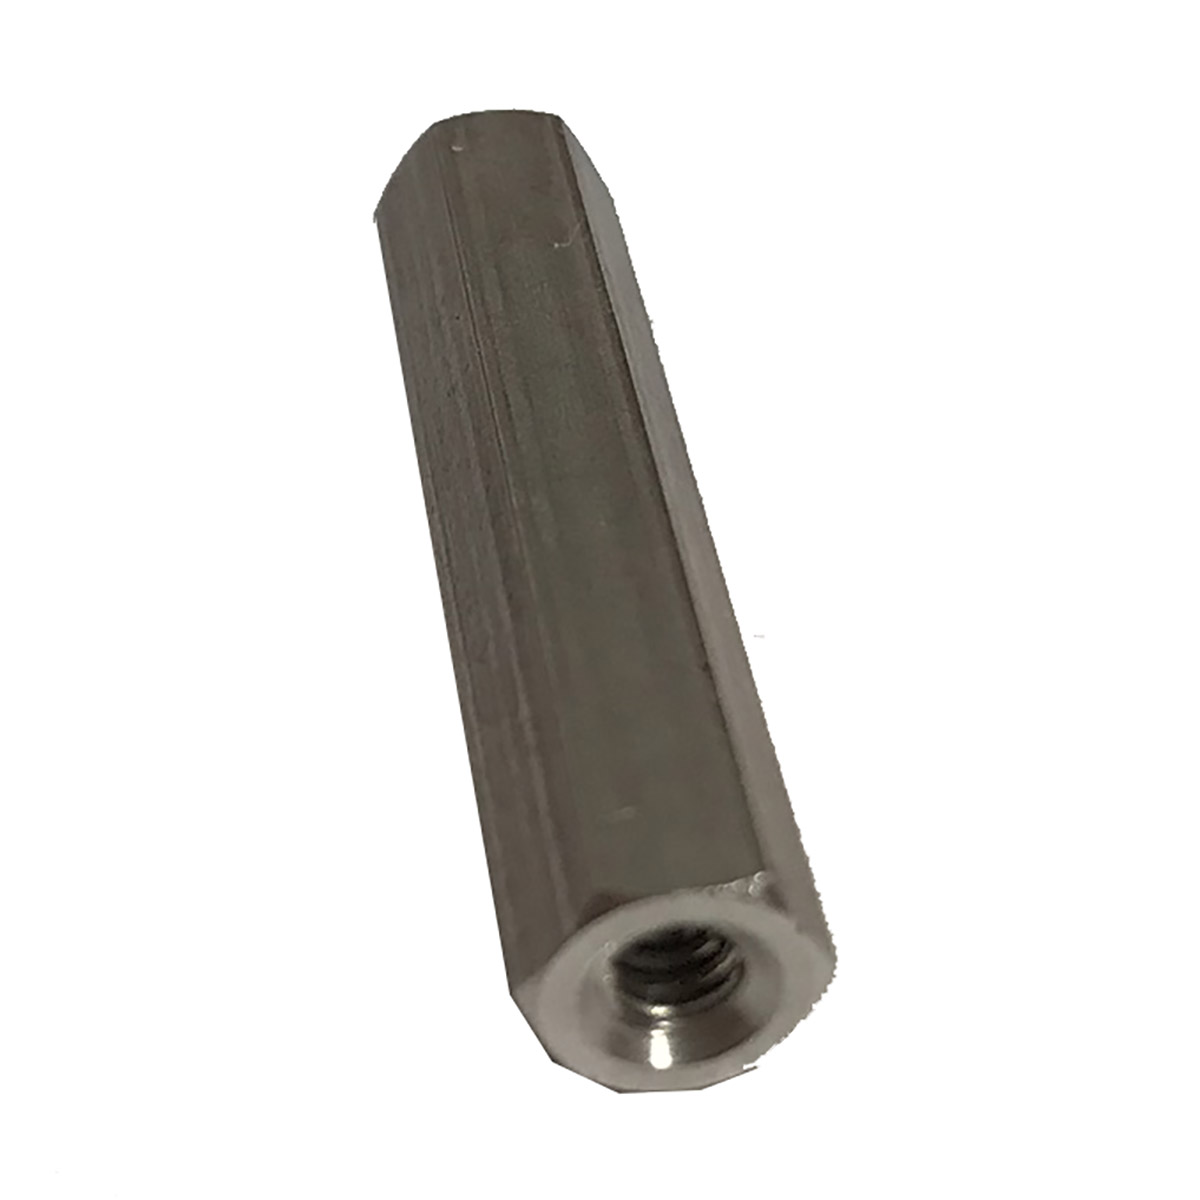 Stern Pinball 6-32 Hex Spacer for Stern Pin